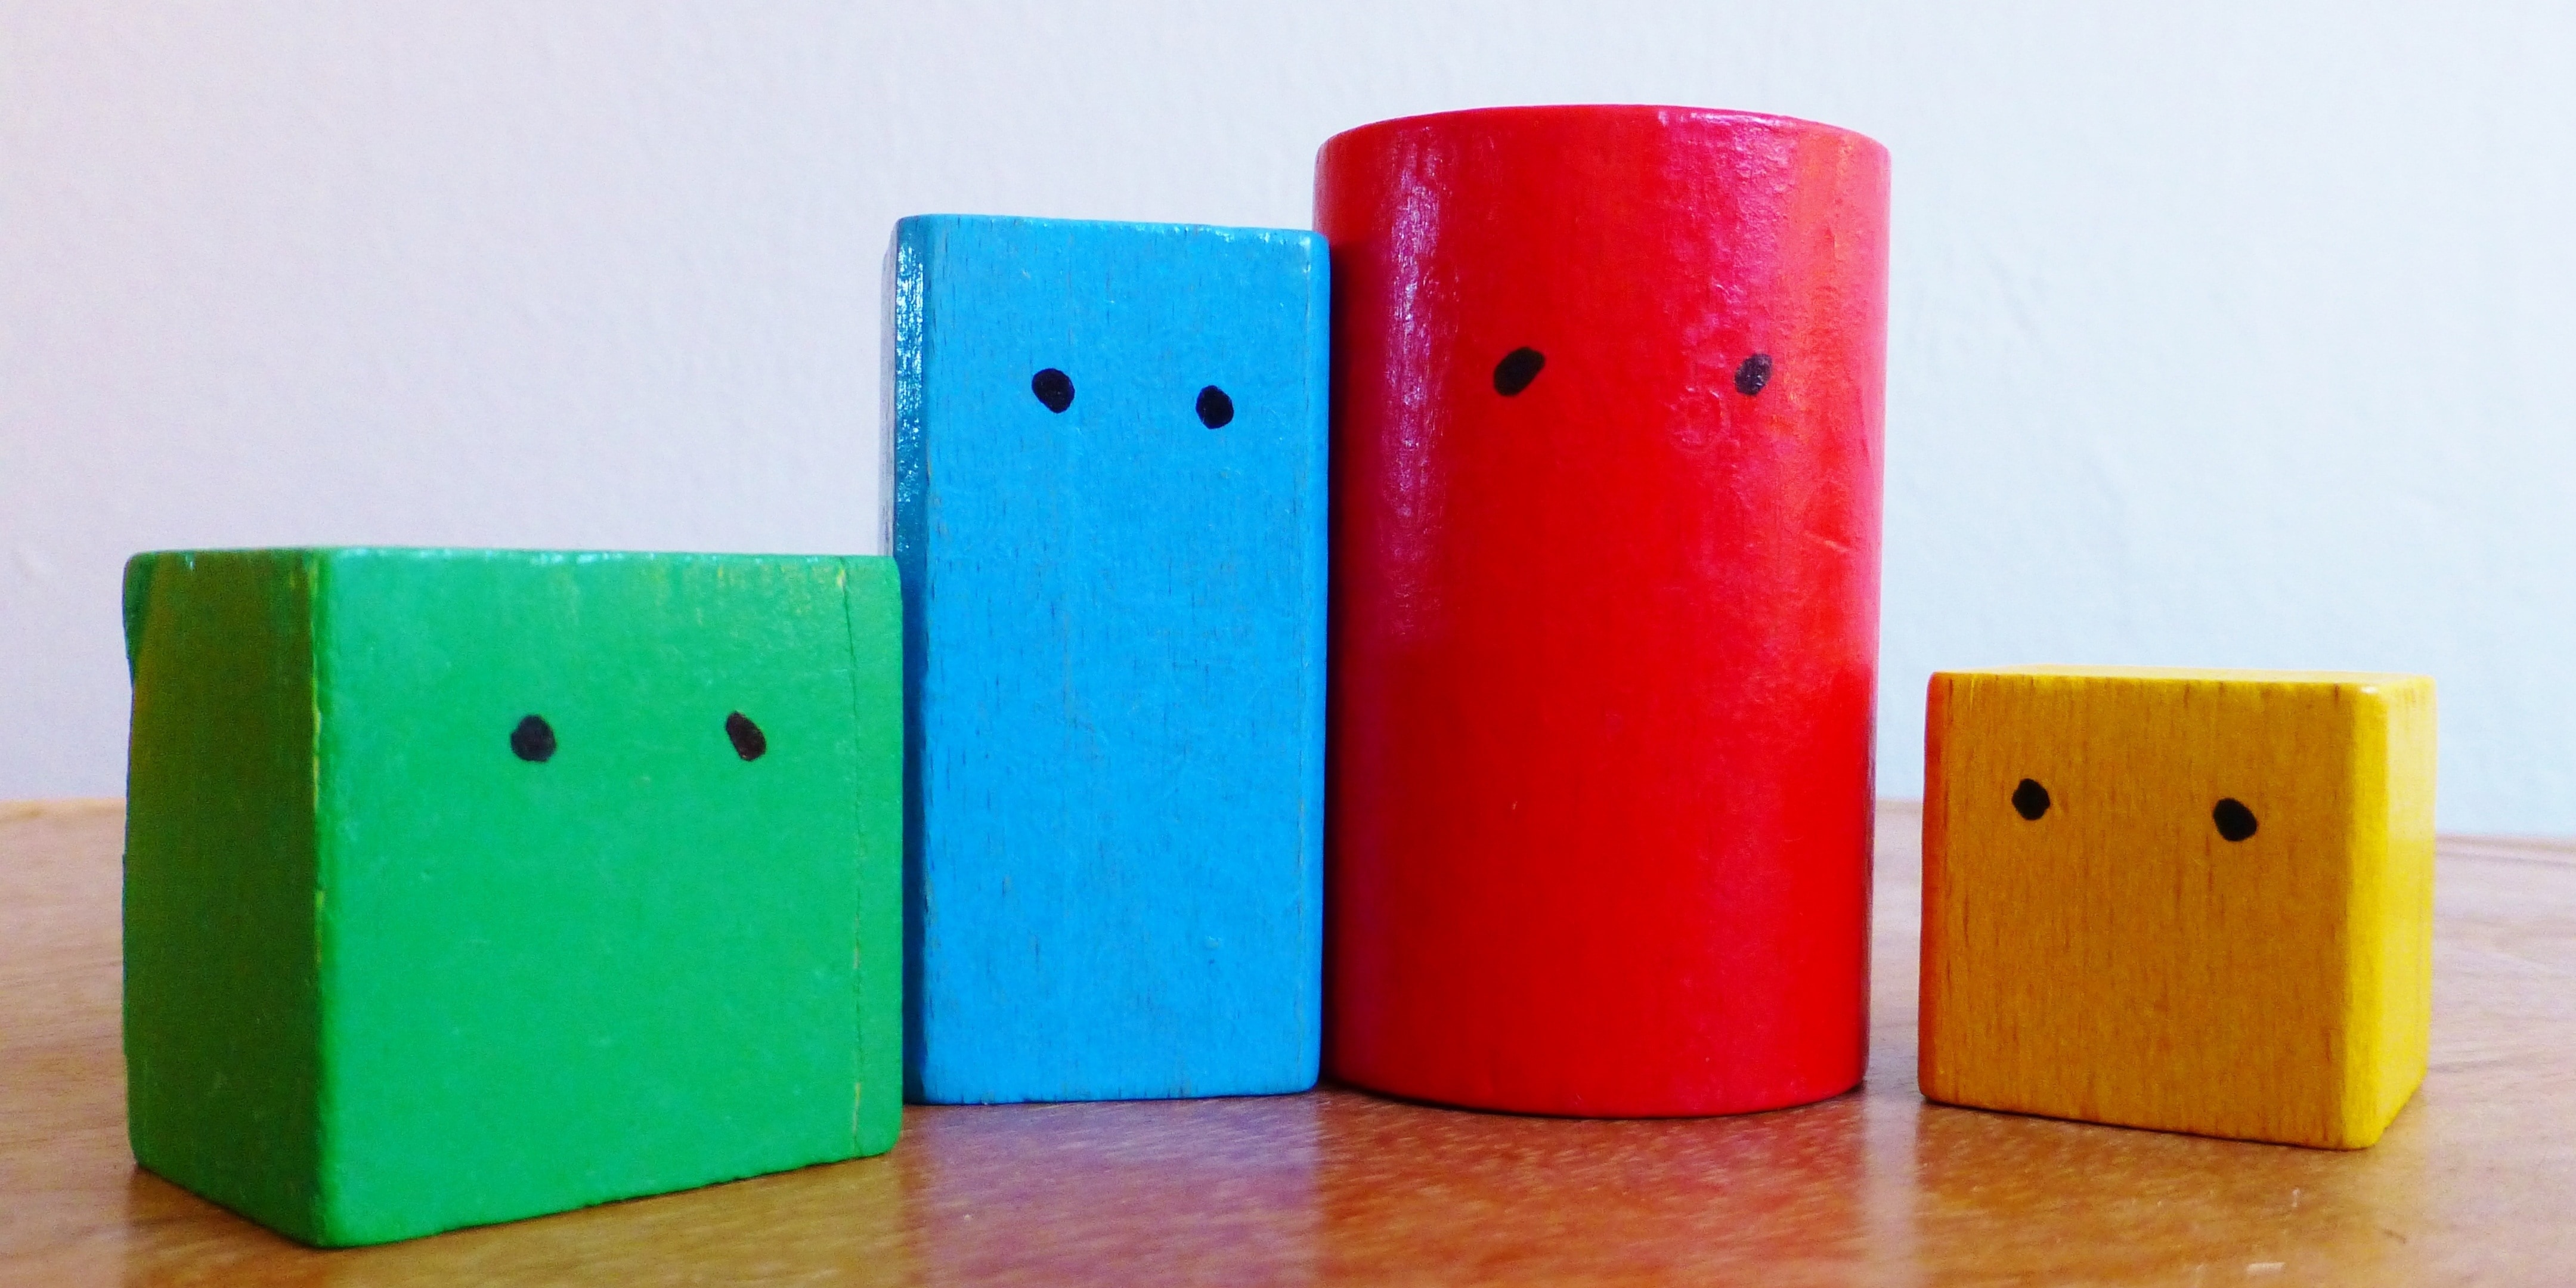 4 red green and yellow wooden blocks